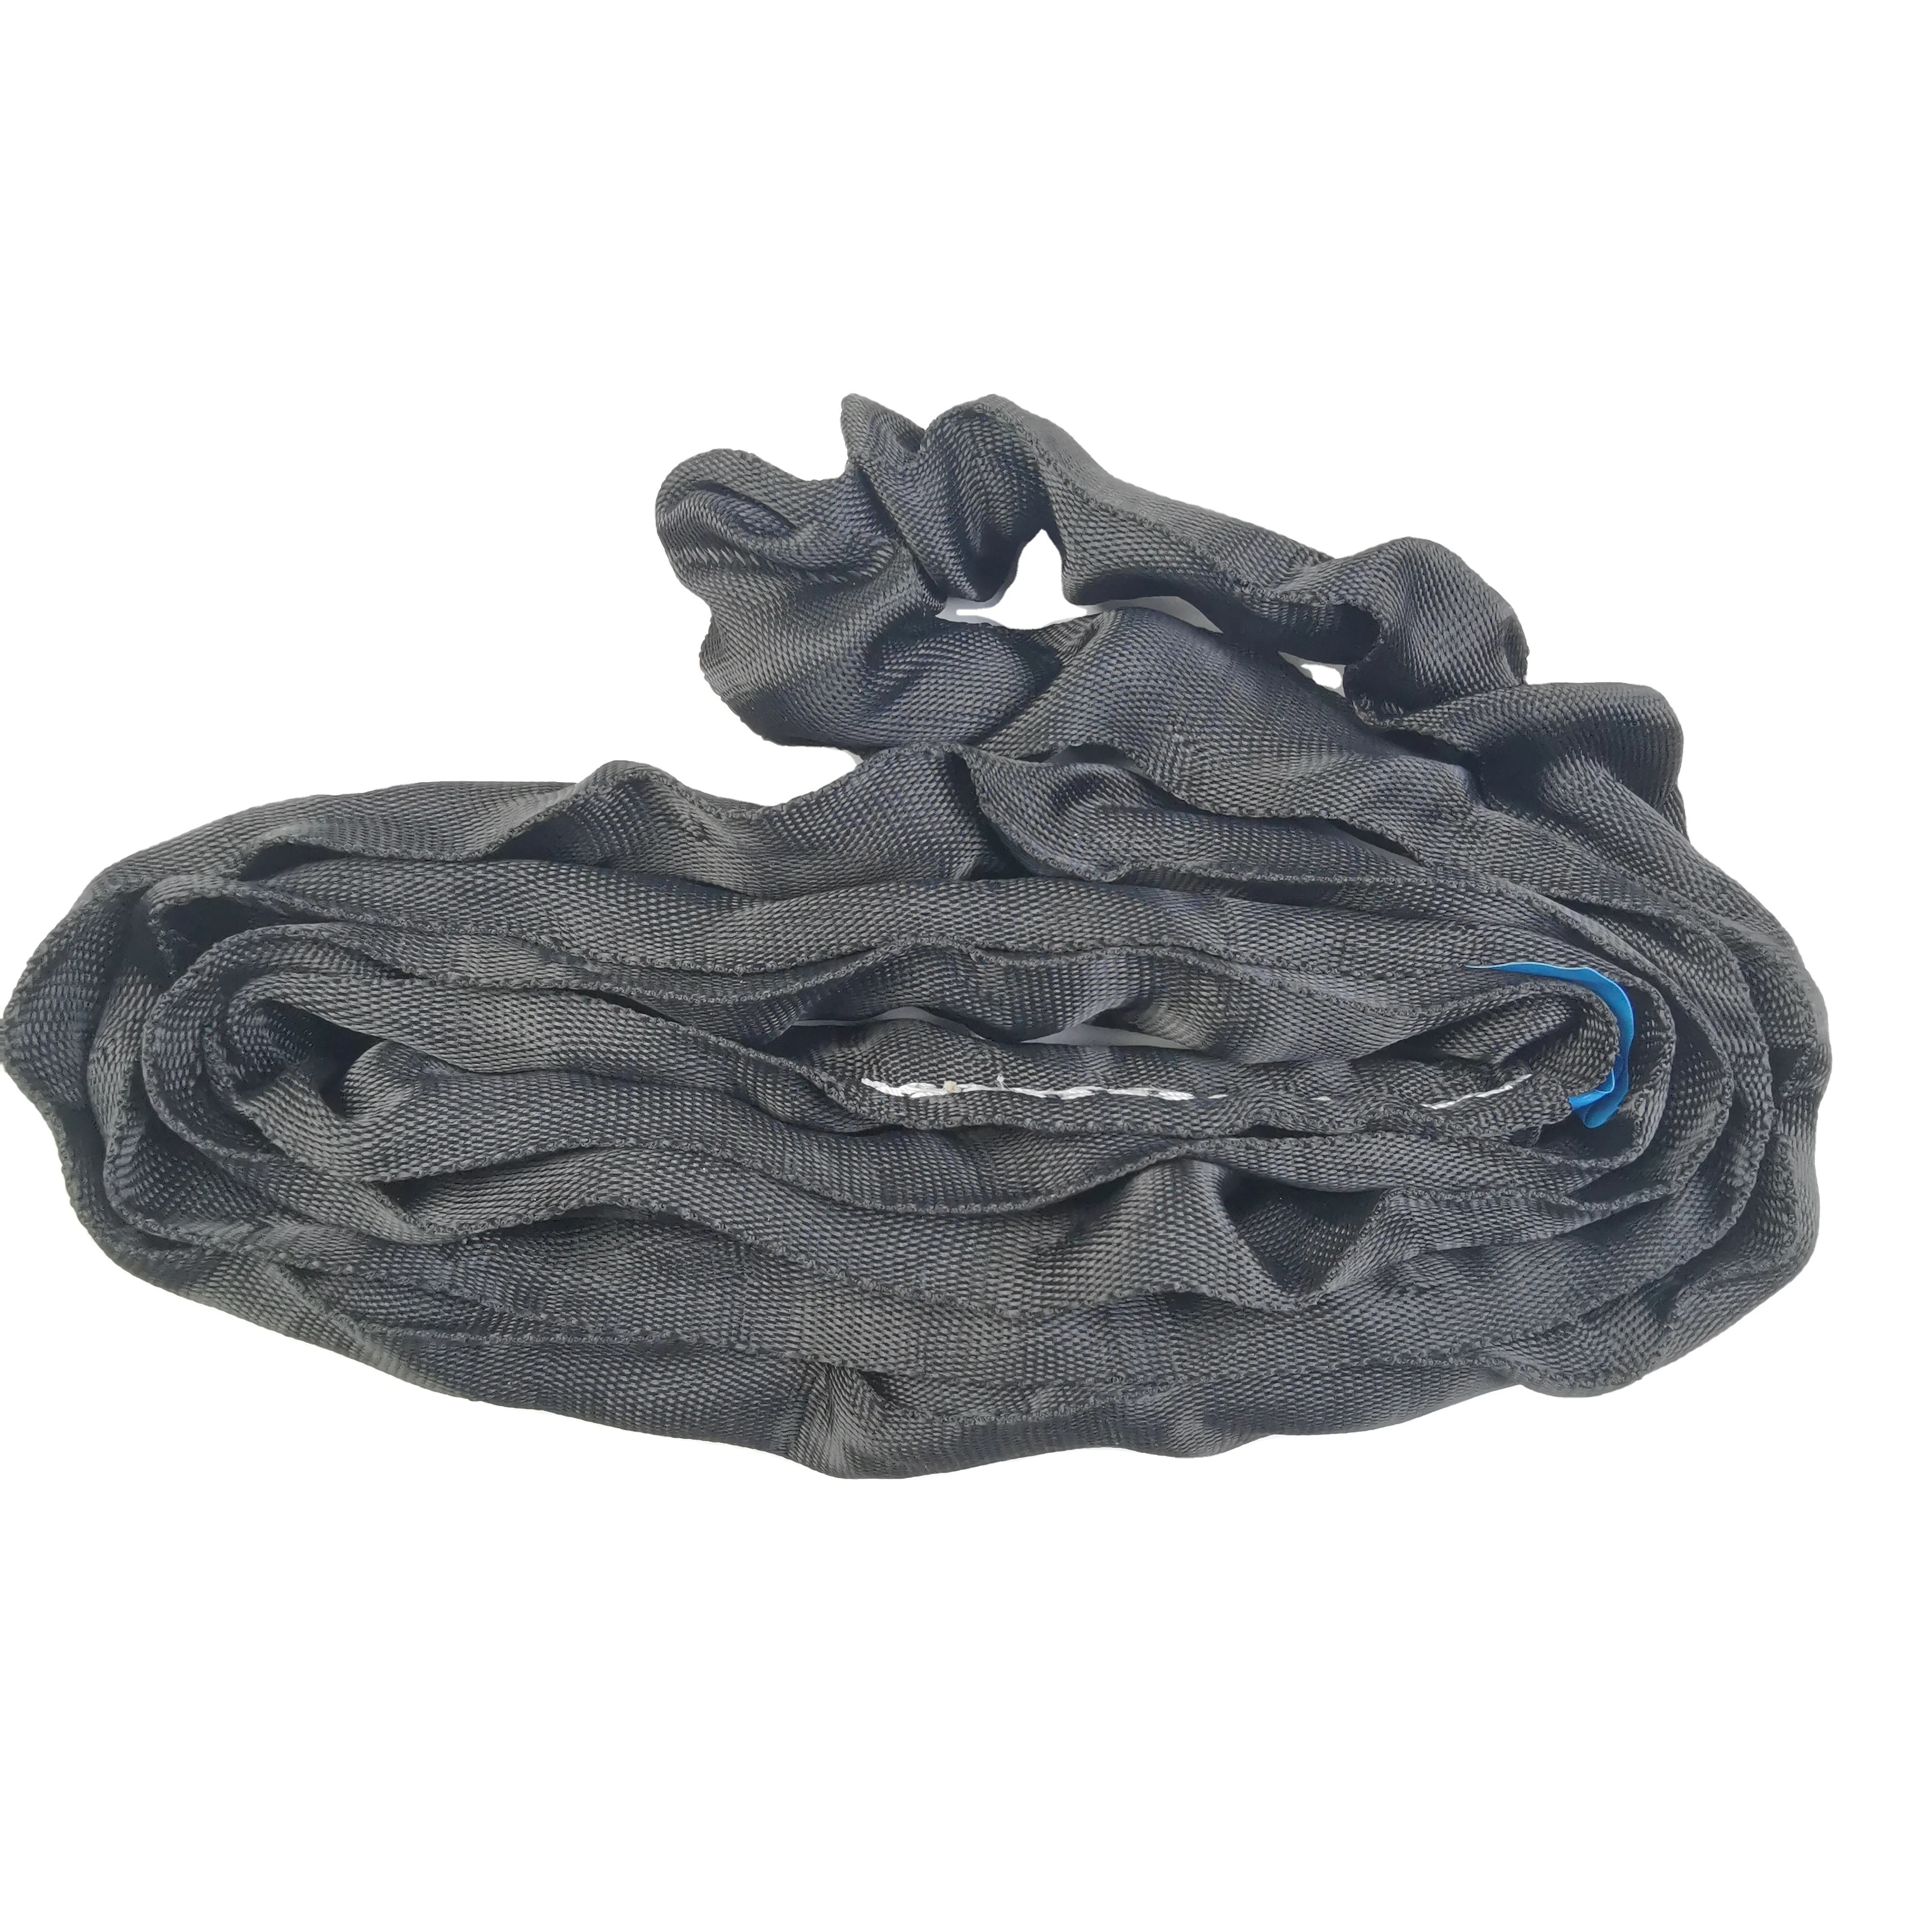 100% high tenacity polyester of out slleeve and inner core  lifting slings